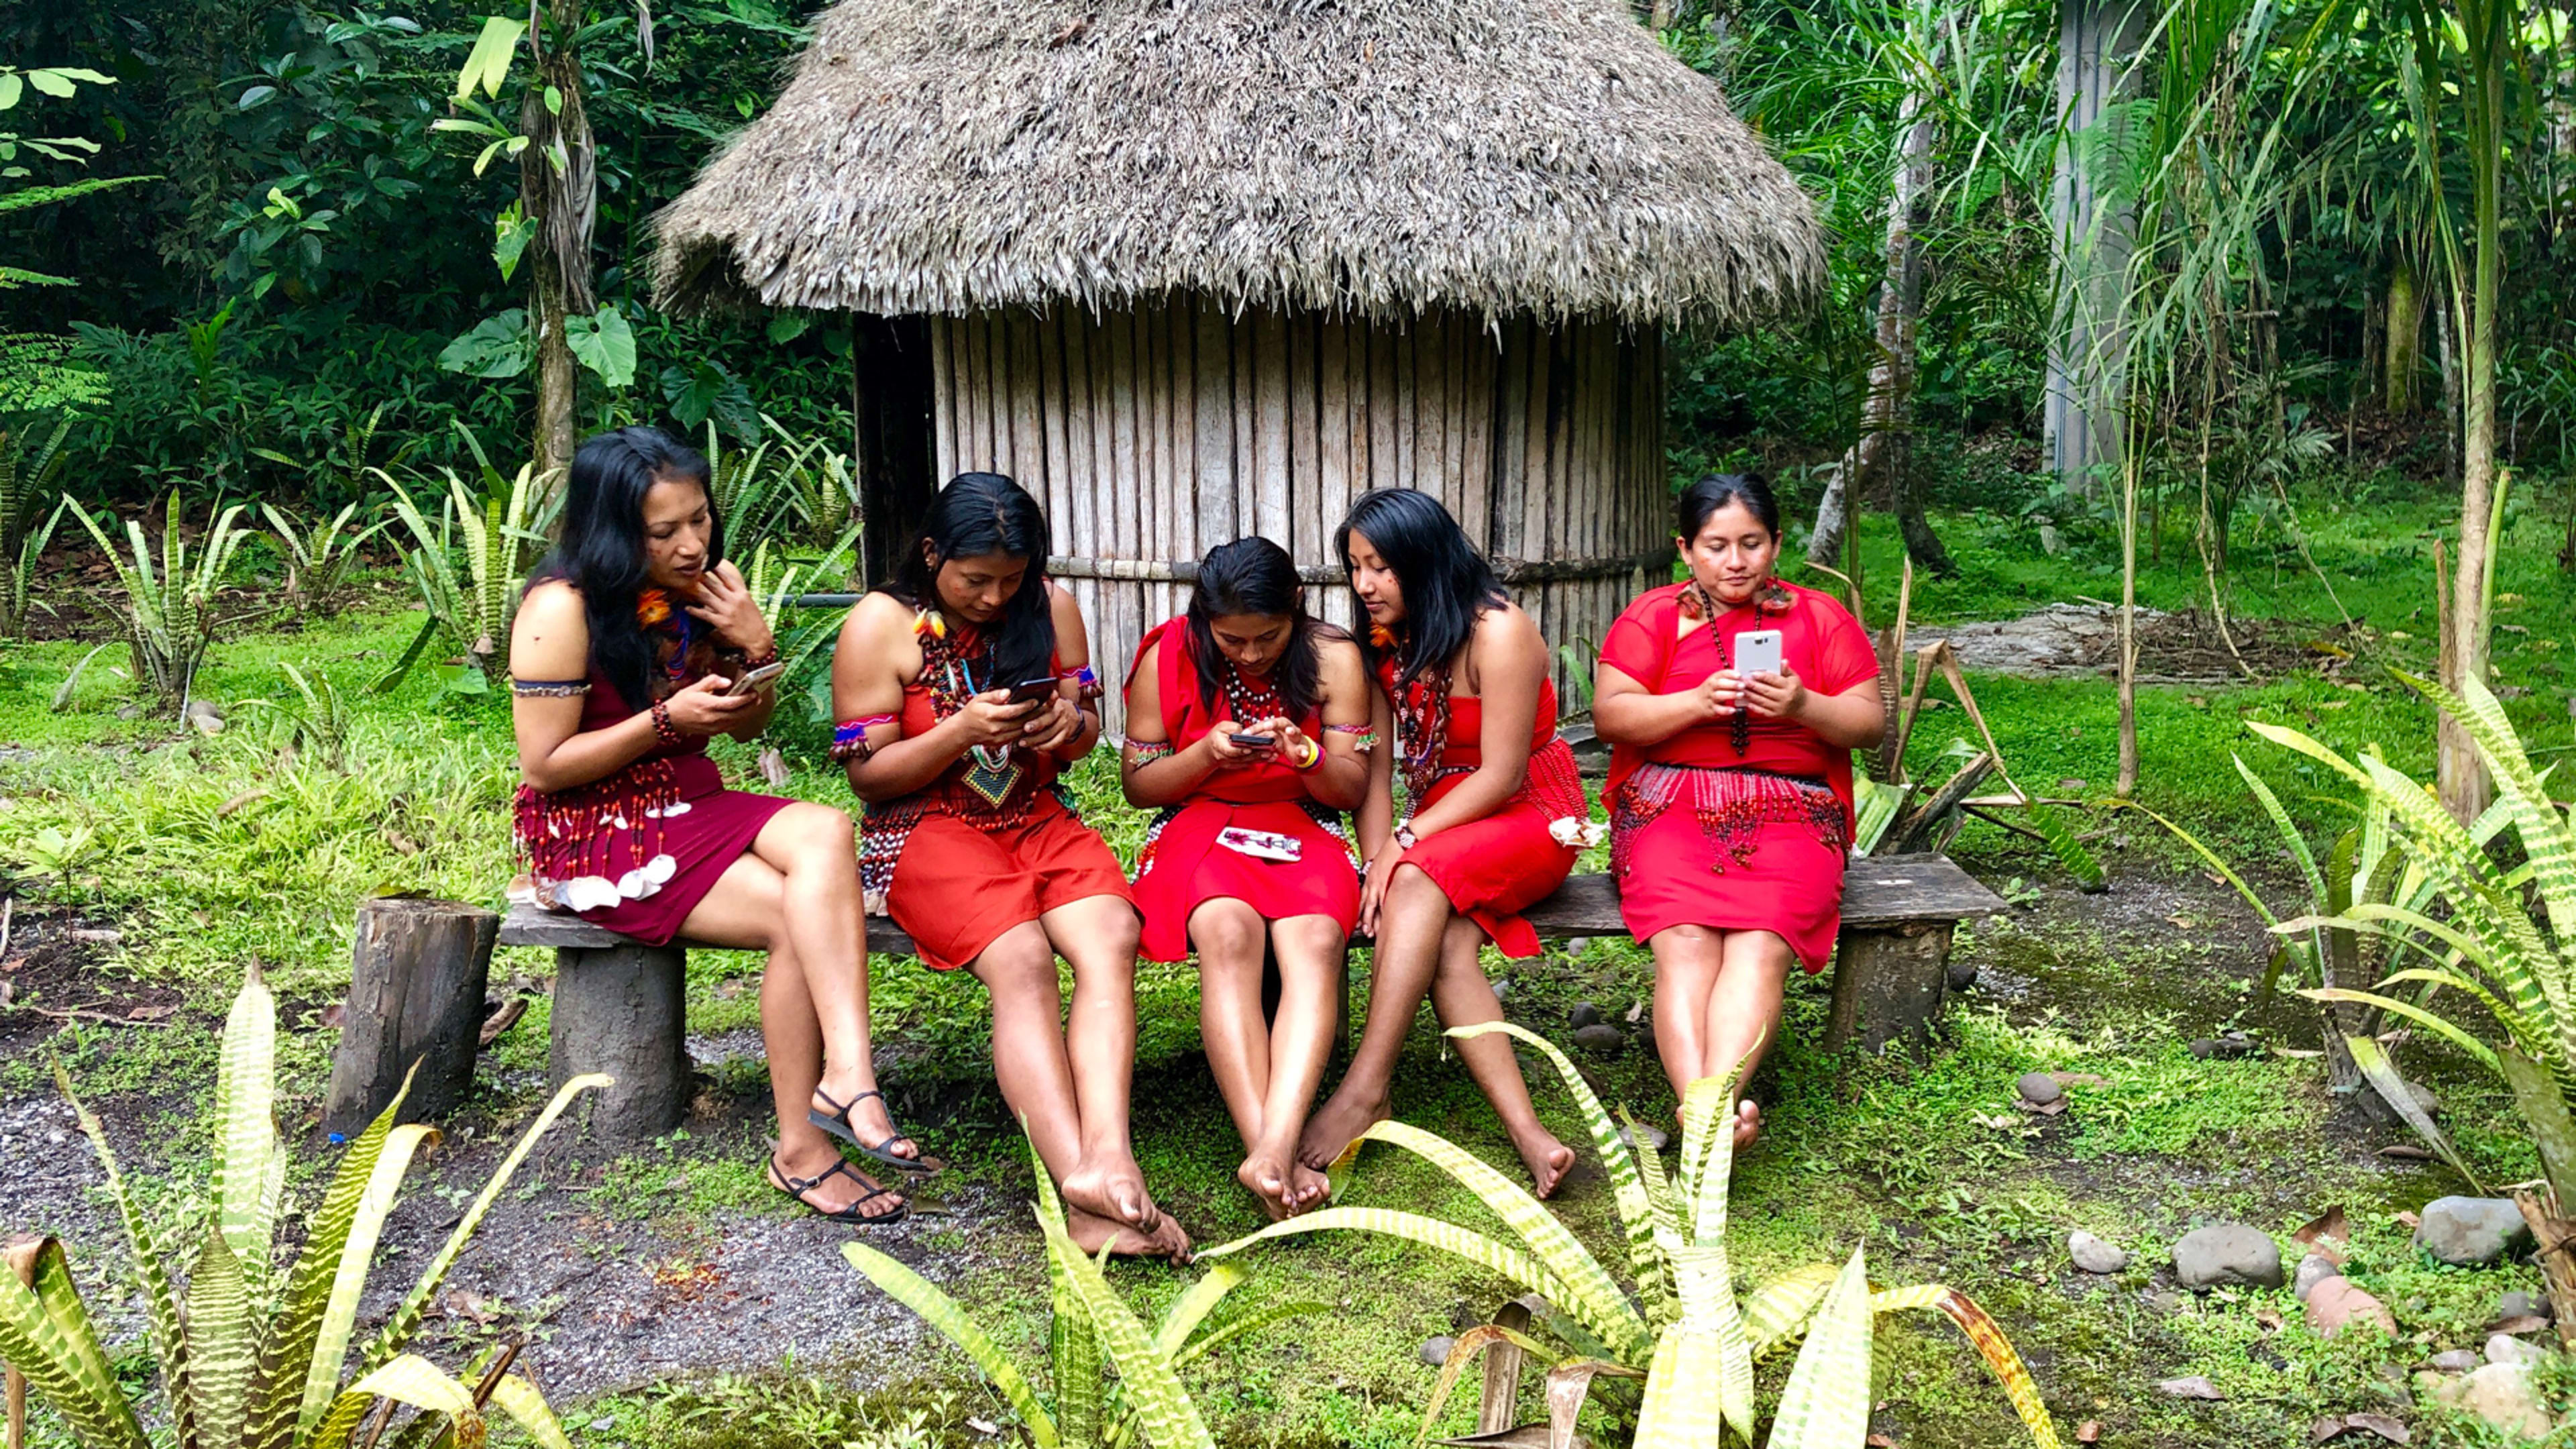 These indigenous women are recording videos to document their traditional knowledge before it disappears